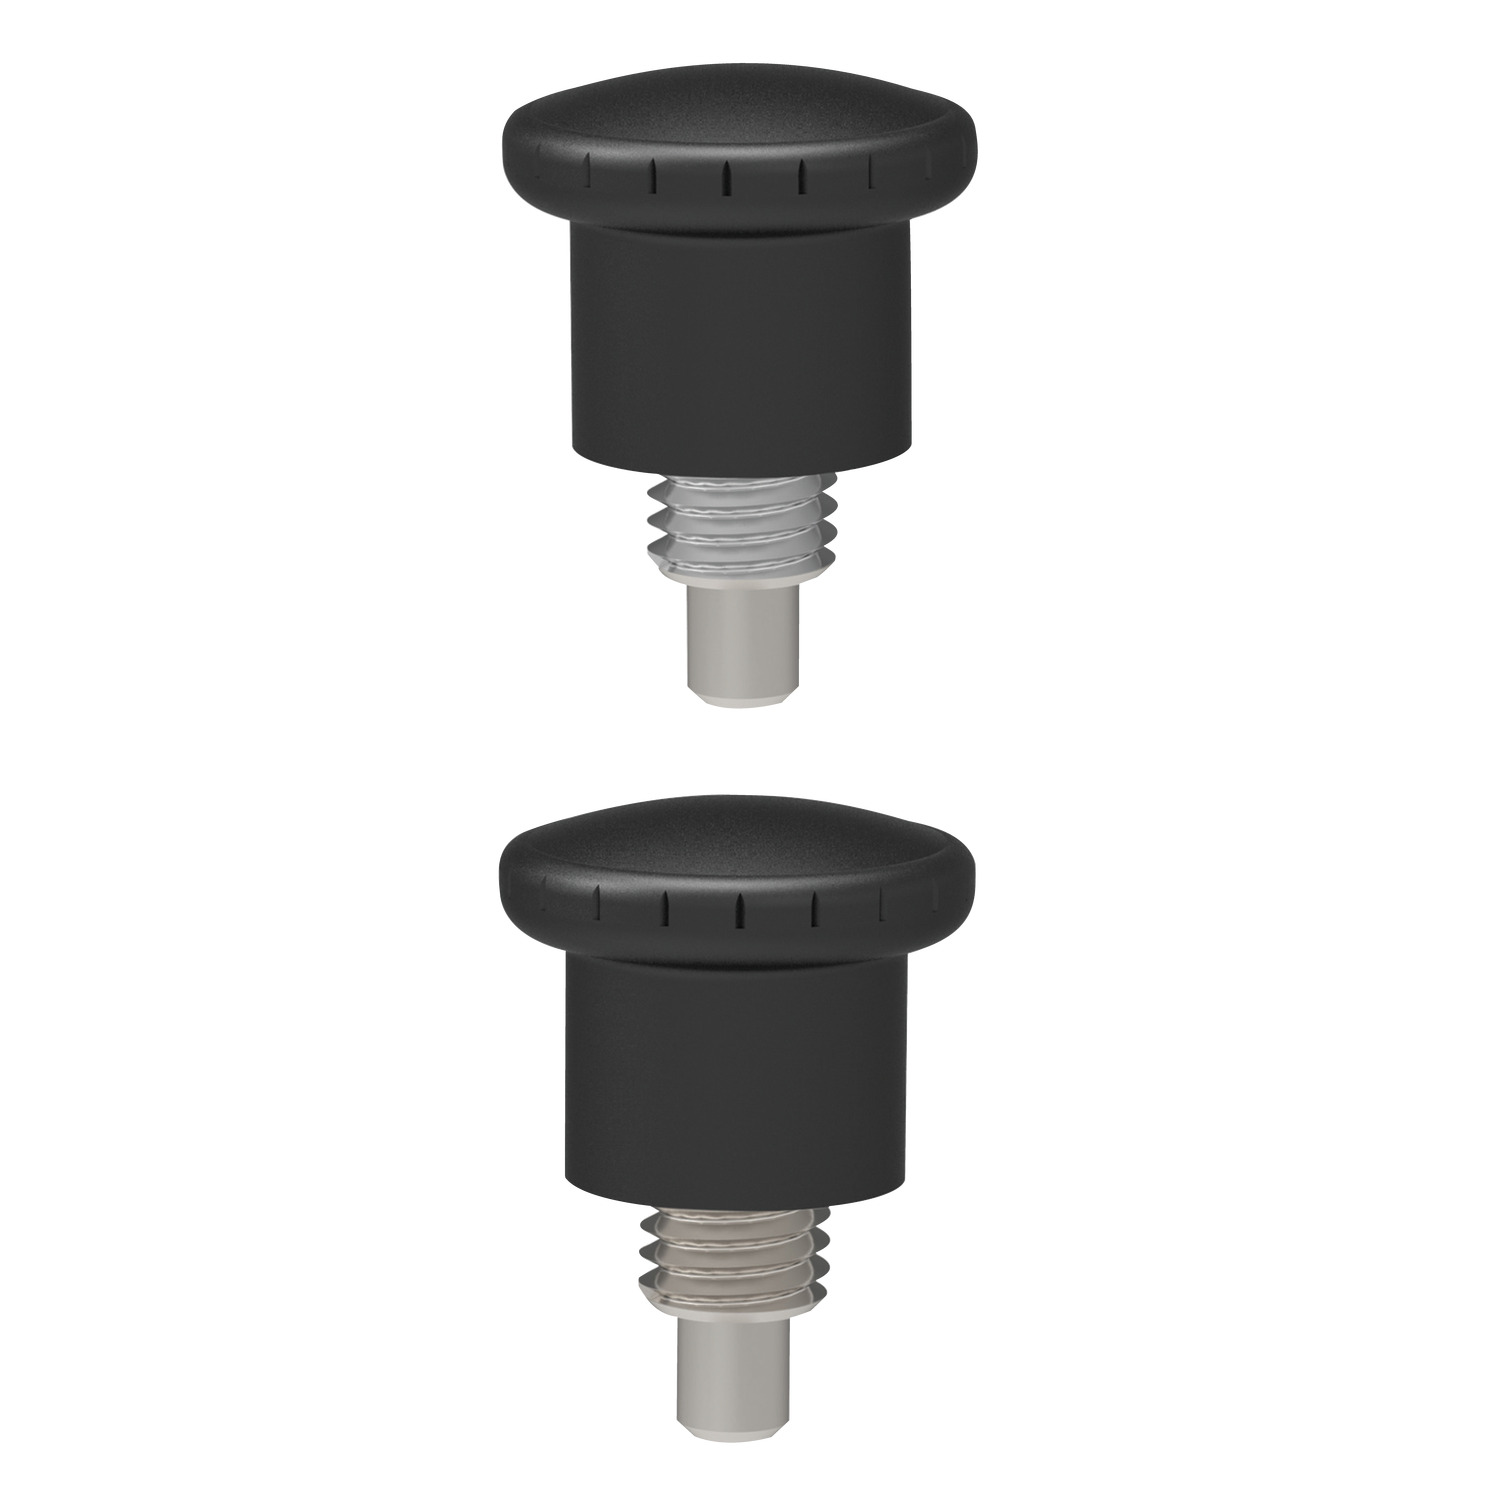 Index Plungers - Pull Grip Ideal for smaller and lighter location requirements or those with thin materials.